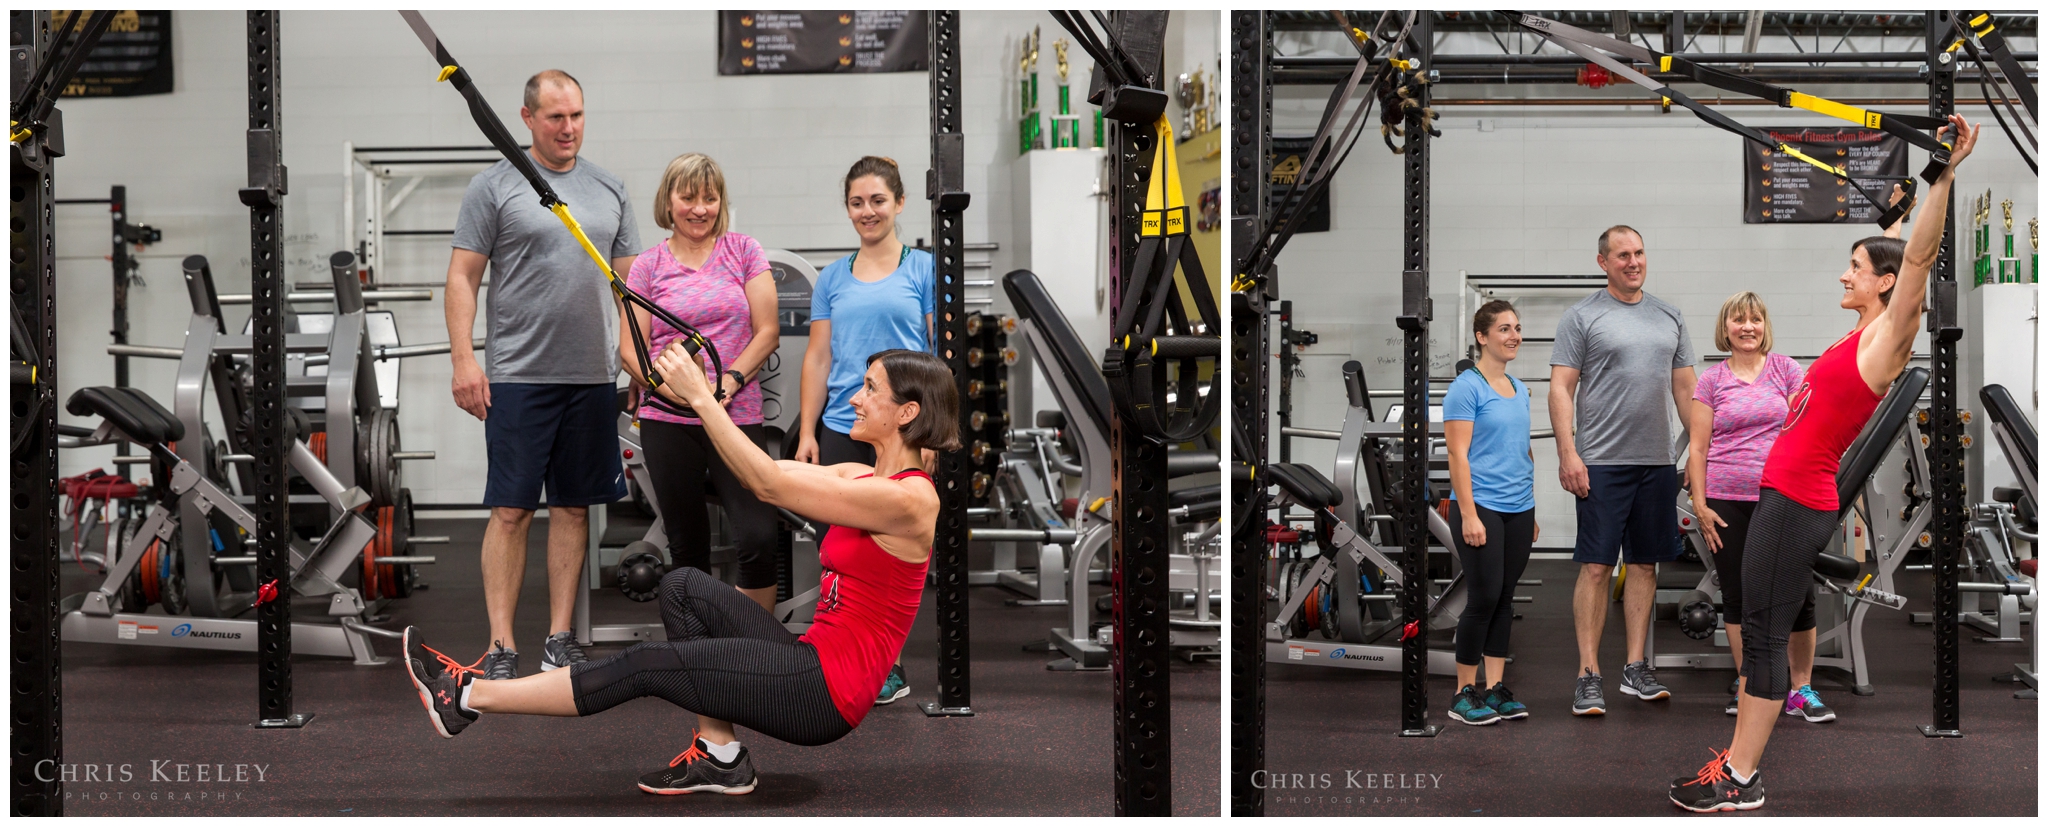 dover-new-hampshire-fitness-photography-trx-personal-trainer-photoshoot-03.jpg